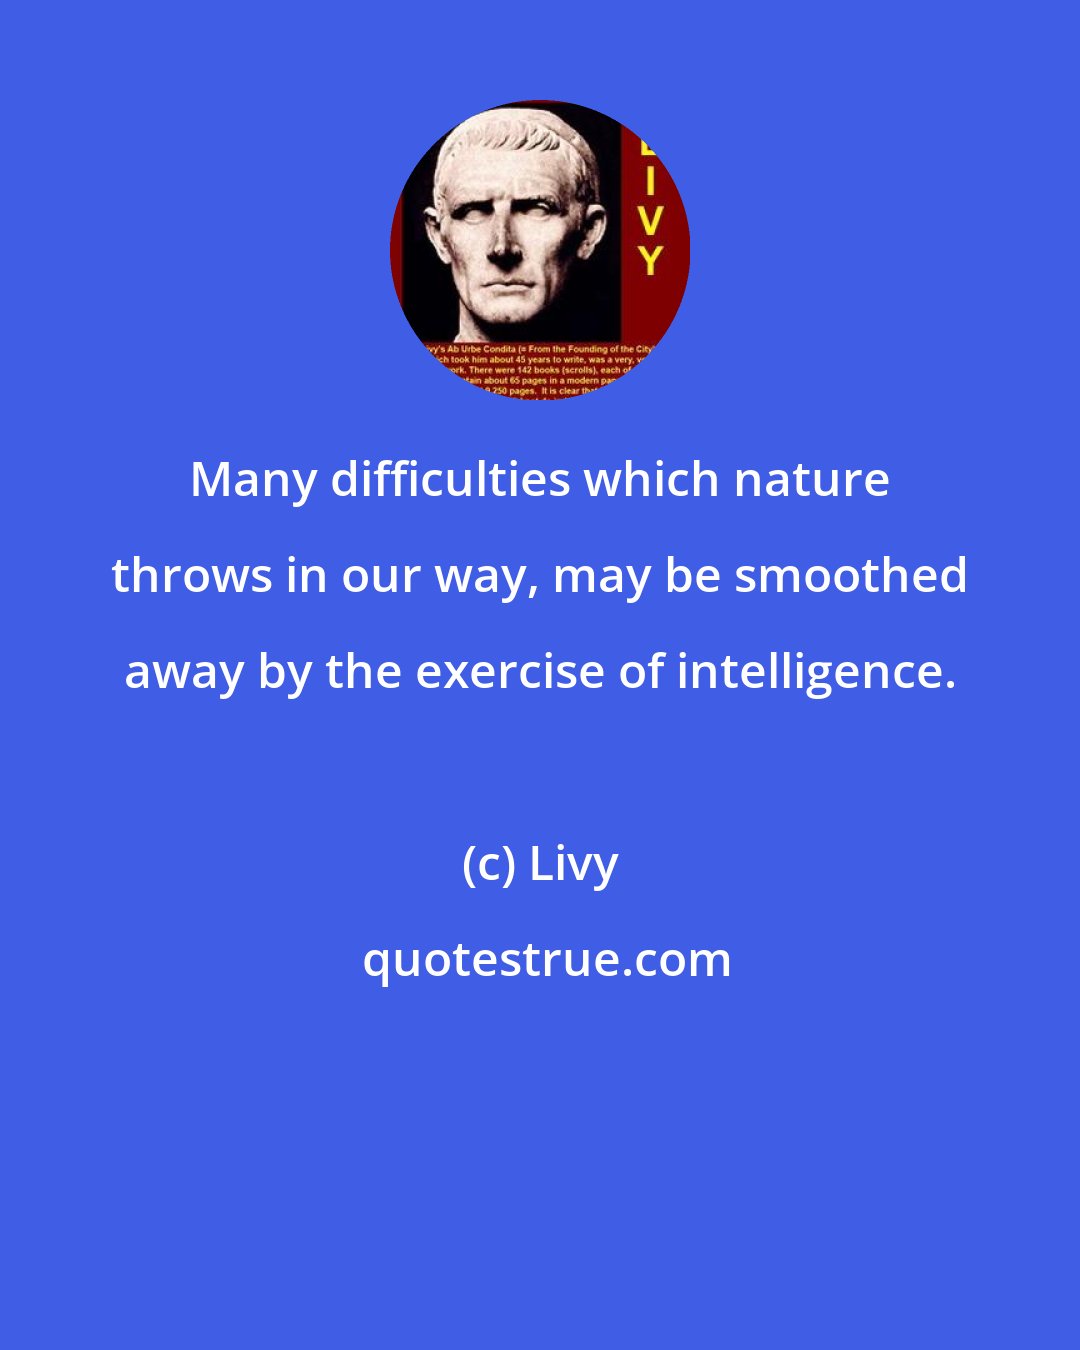 Livy: Many difficulties which nature throws in our way, may be smoothed away by the exercise of intelligence.